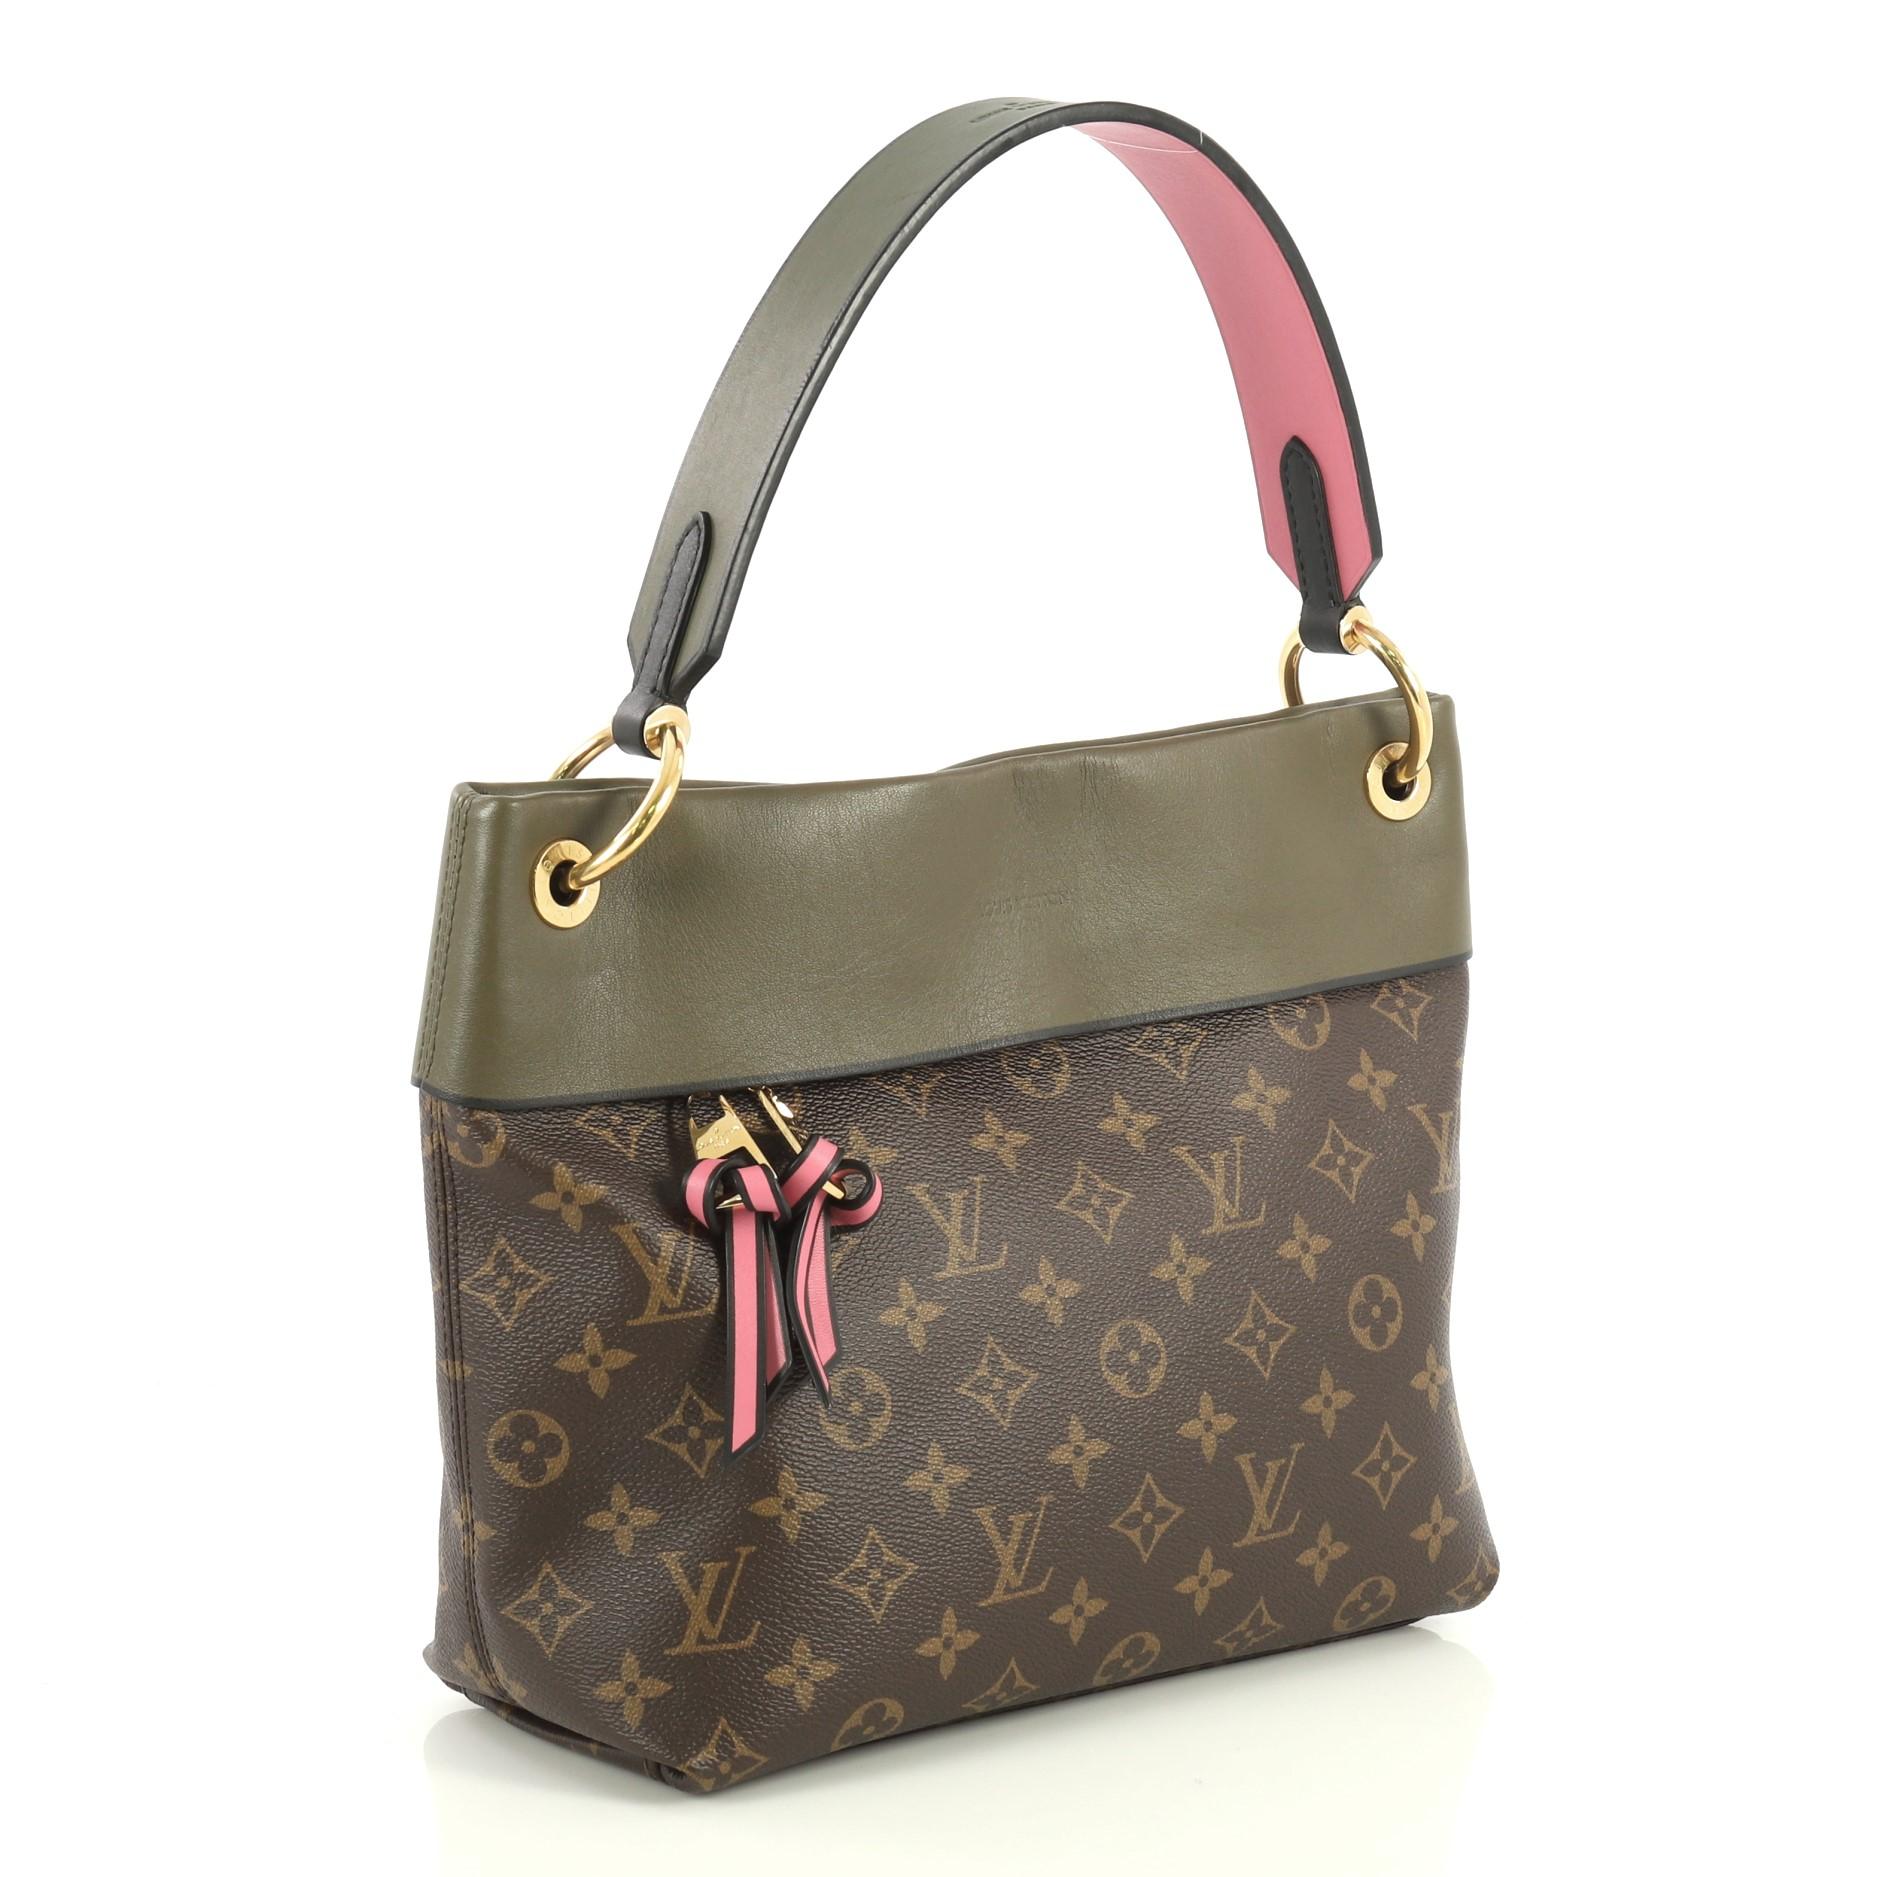 This Louis Vuitton Tuileries Besace Bag Monogram Canvas with Leather, crafted in brown monogram coated canvas with green leather, features a single loop leather handle and gold-tone hardware. Its hidden magnetic snap closure opens to a pink